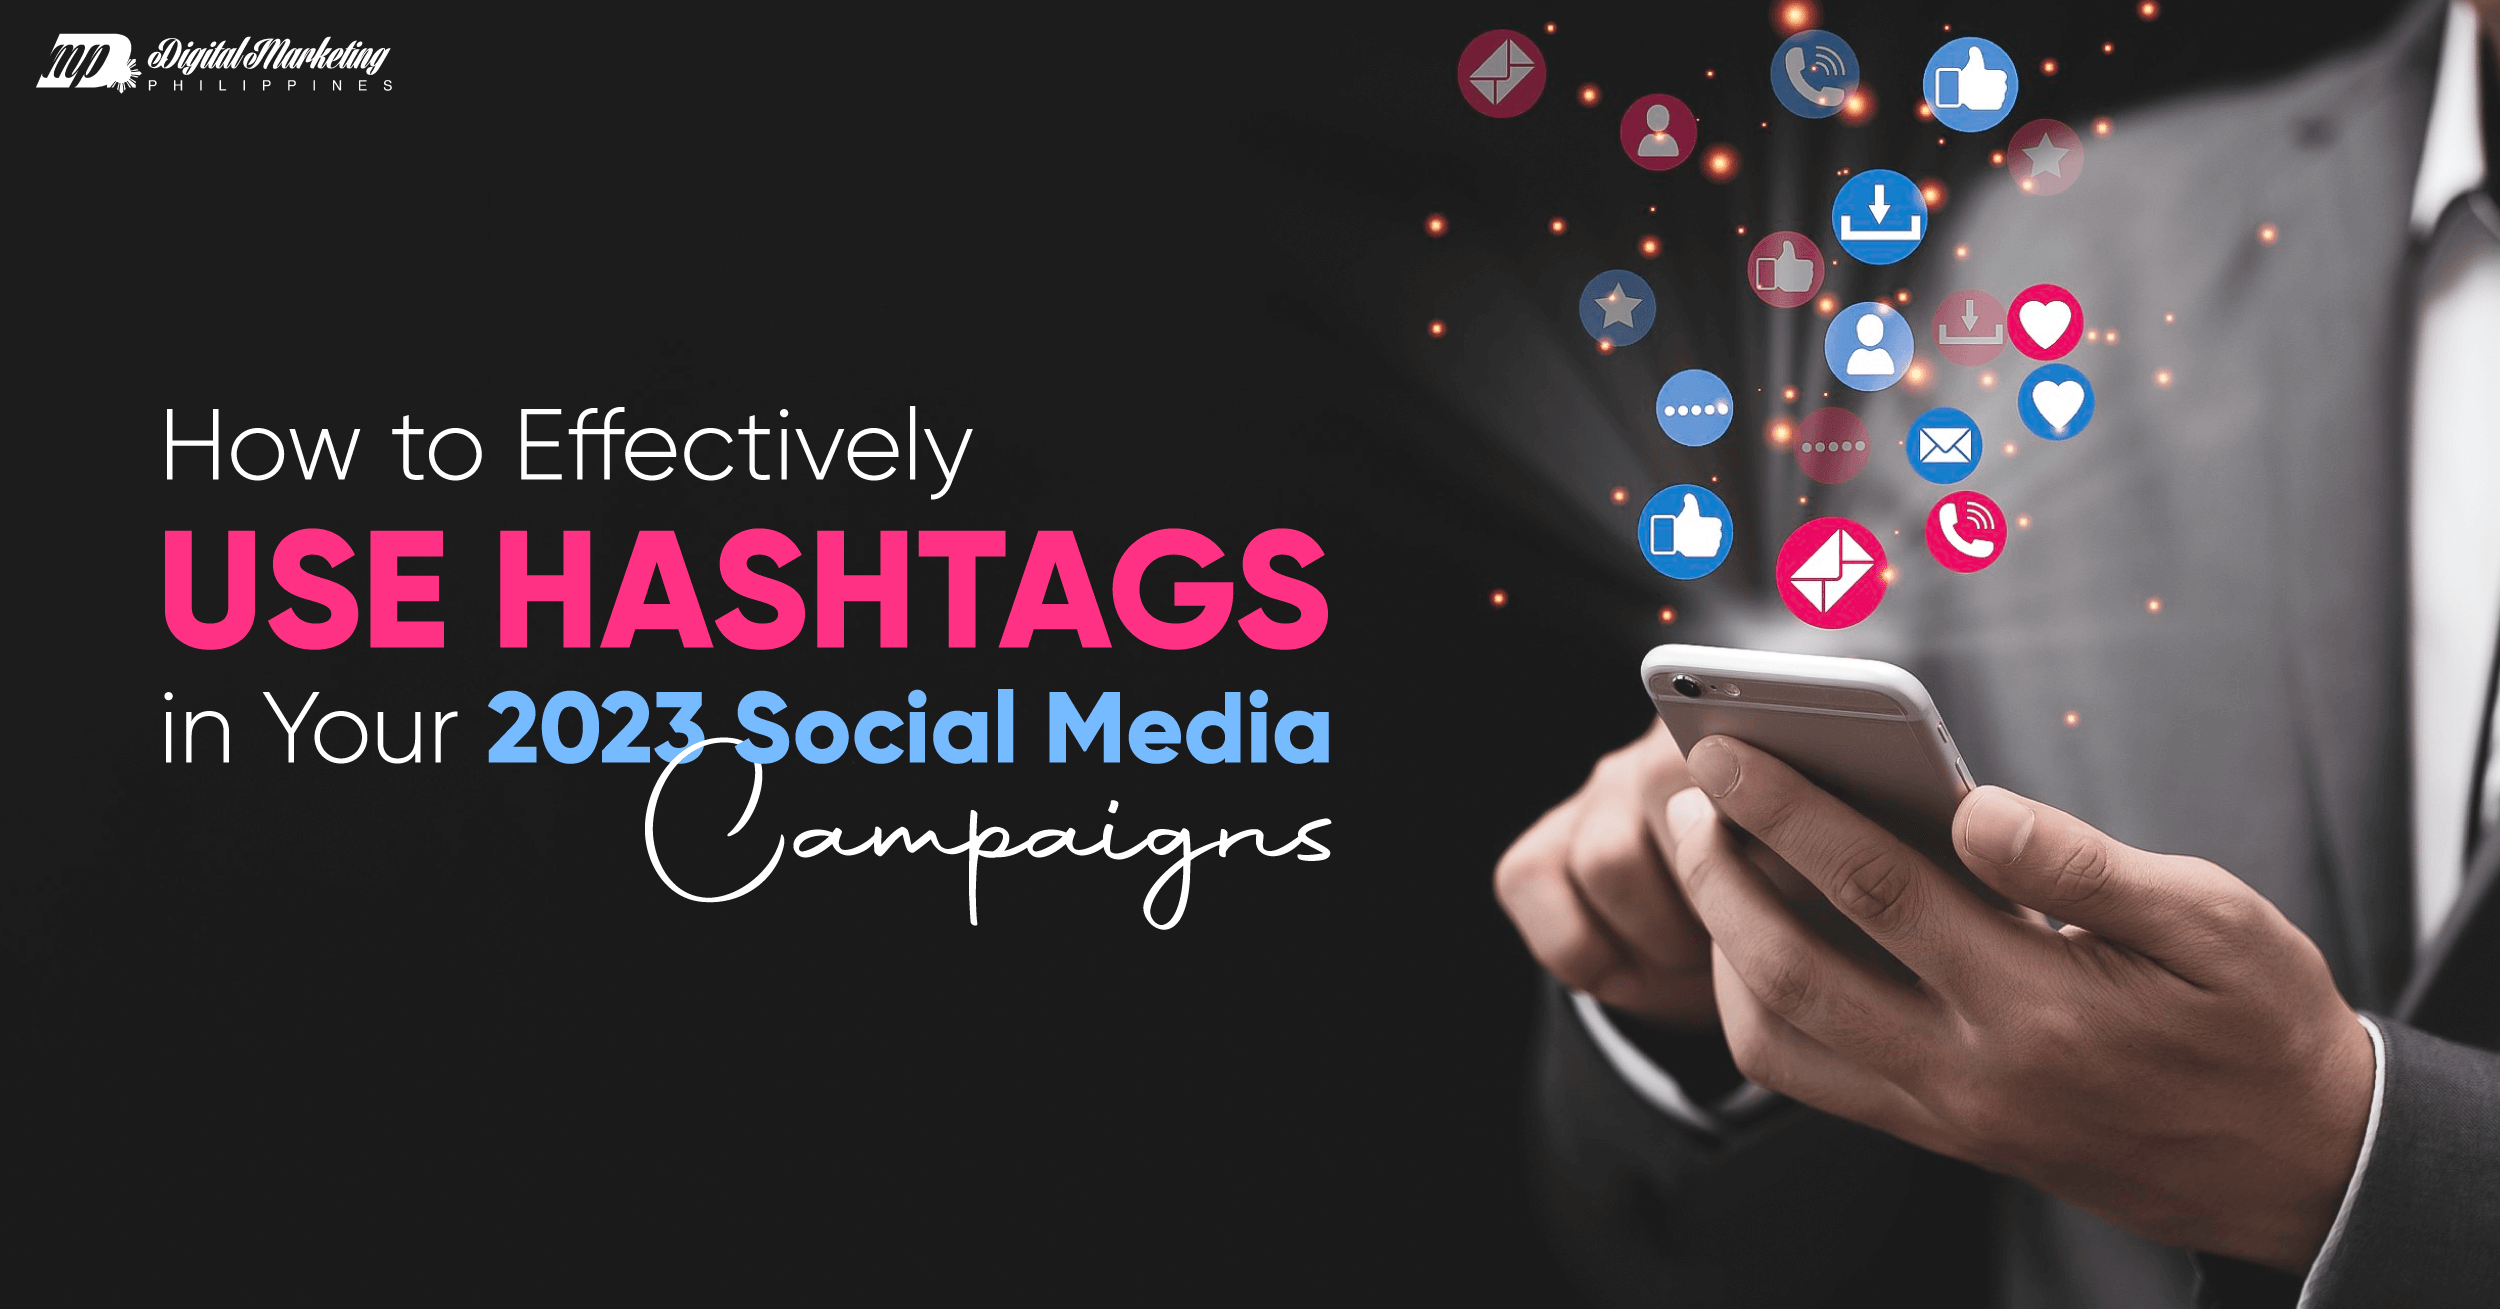 How to Effectively Use Hashtags in Your 2023 Social Media Campaigns